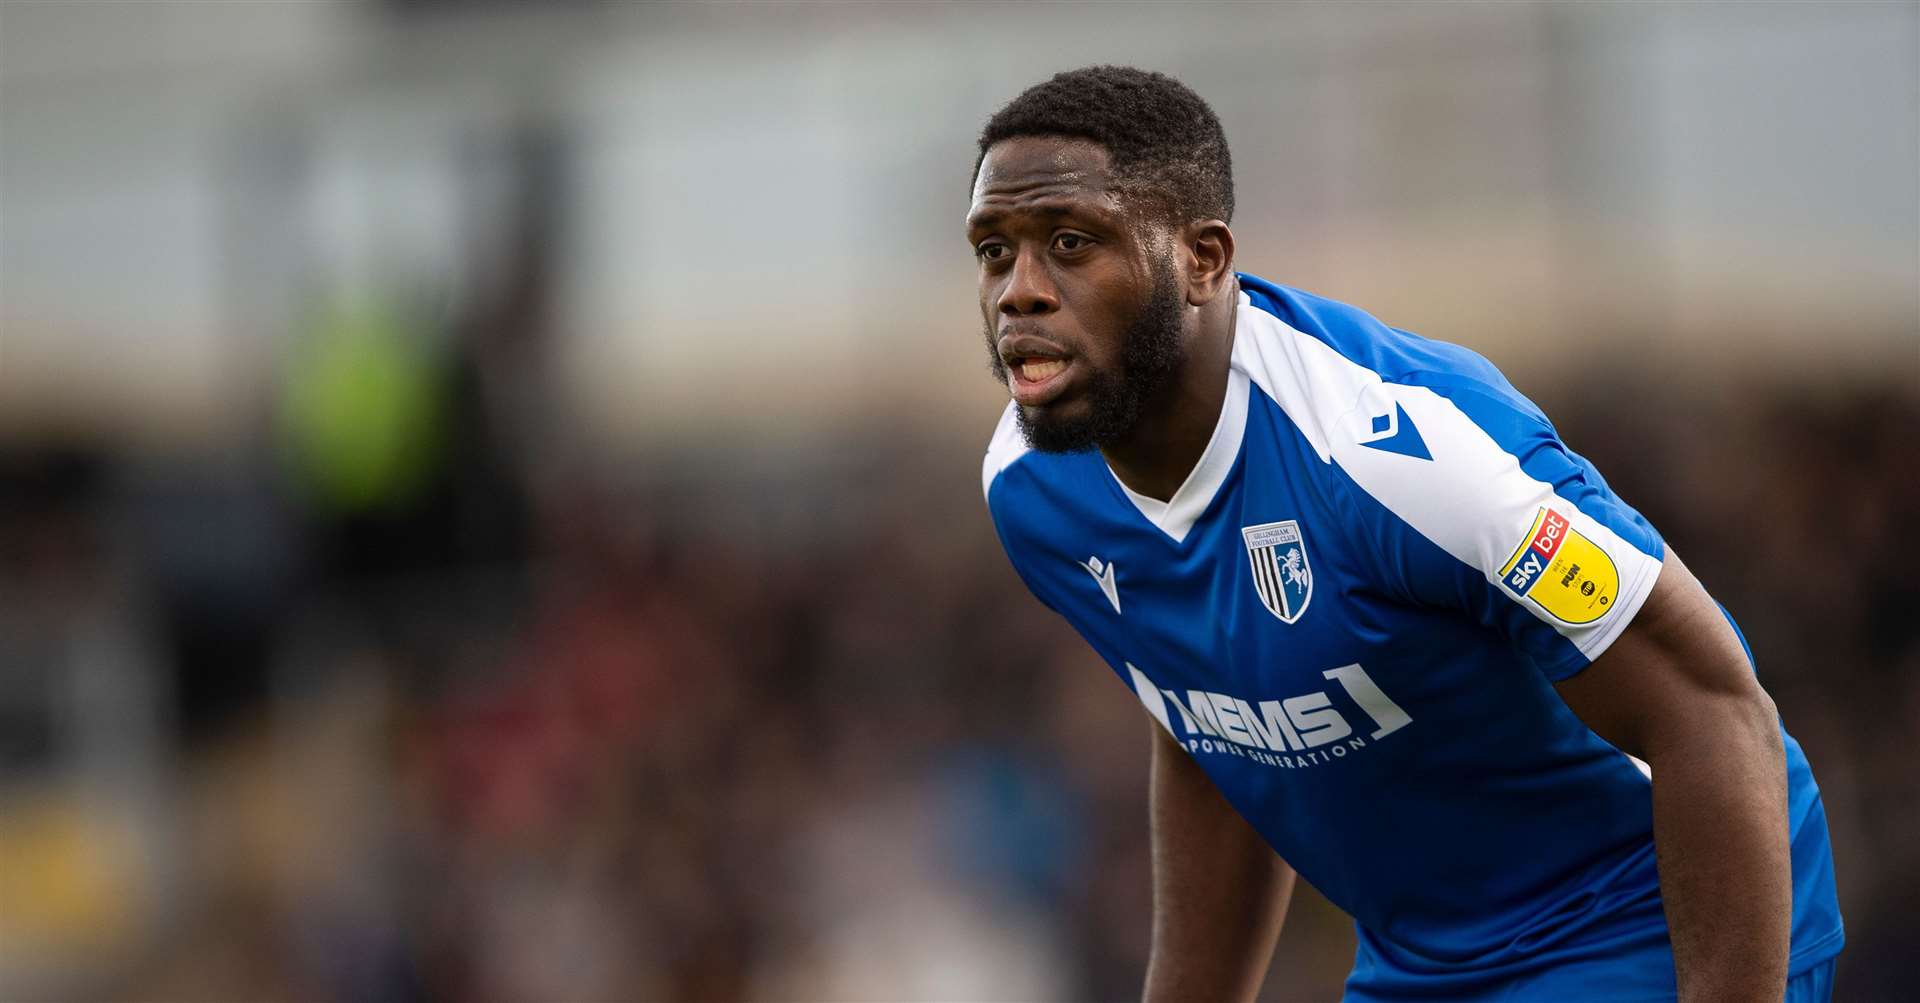 Injury has limited John Akinde to just one appearance this season